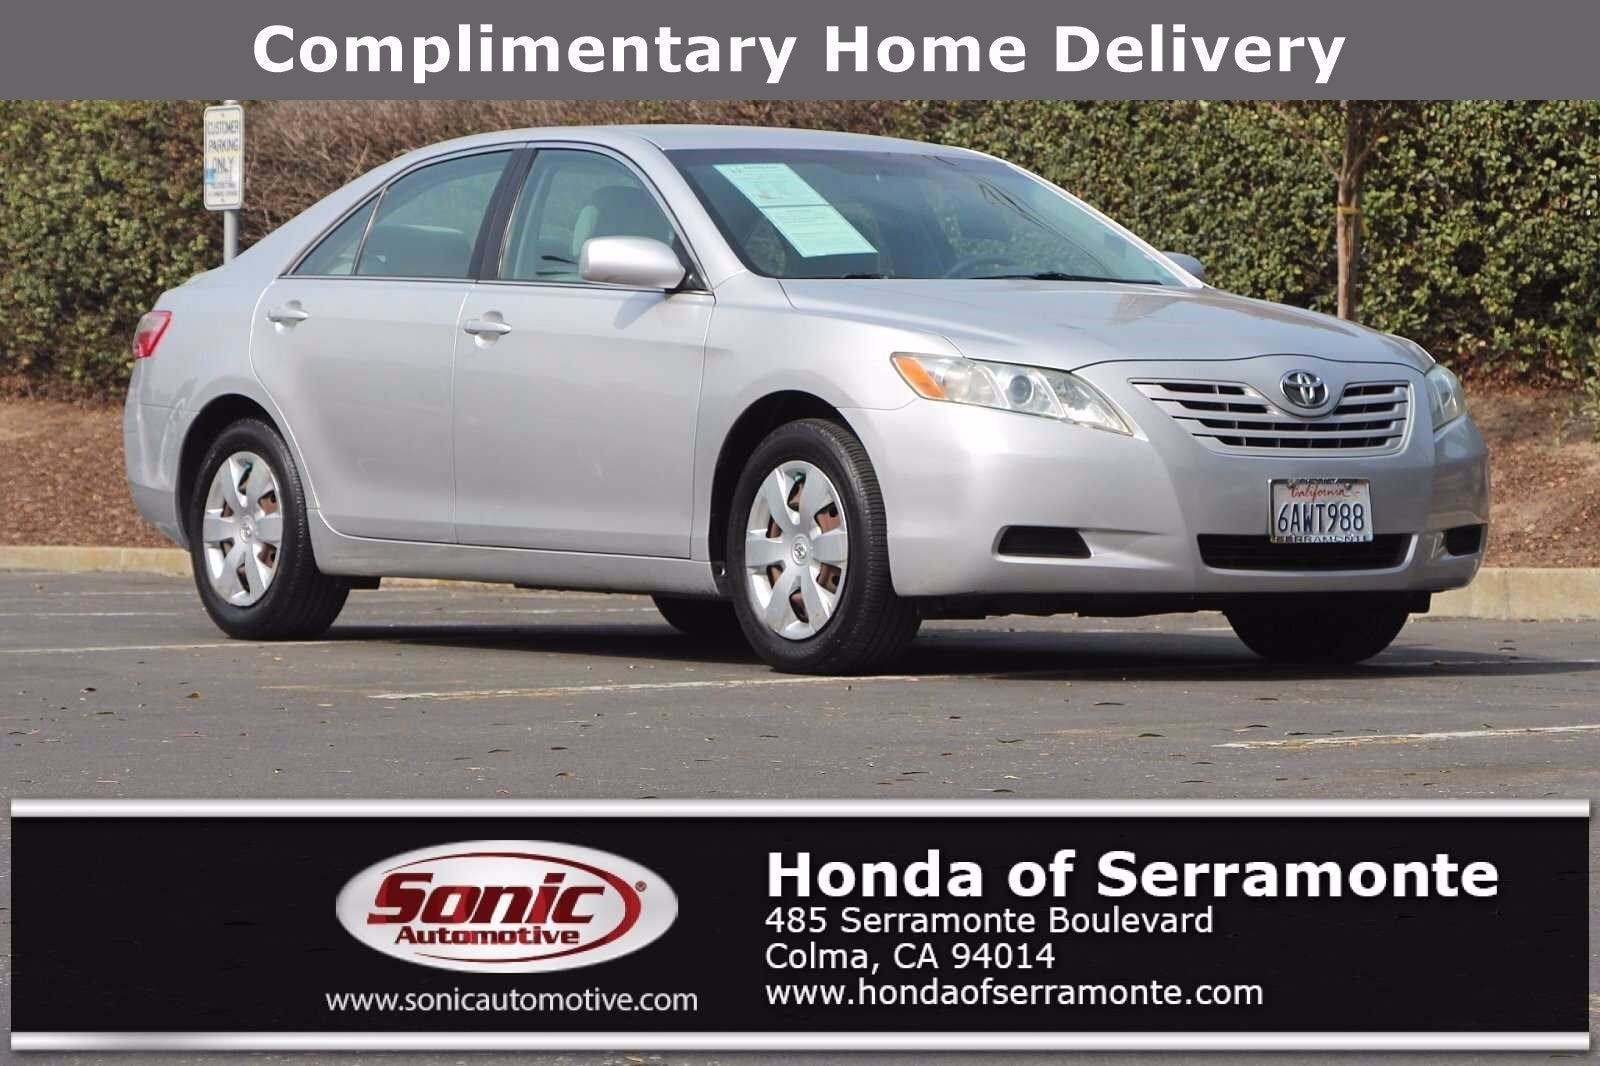 Used 2008 Toyota Camry